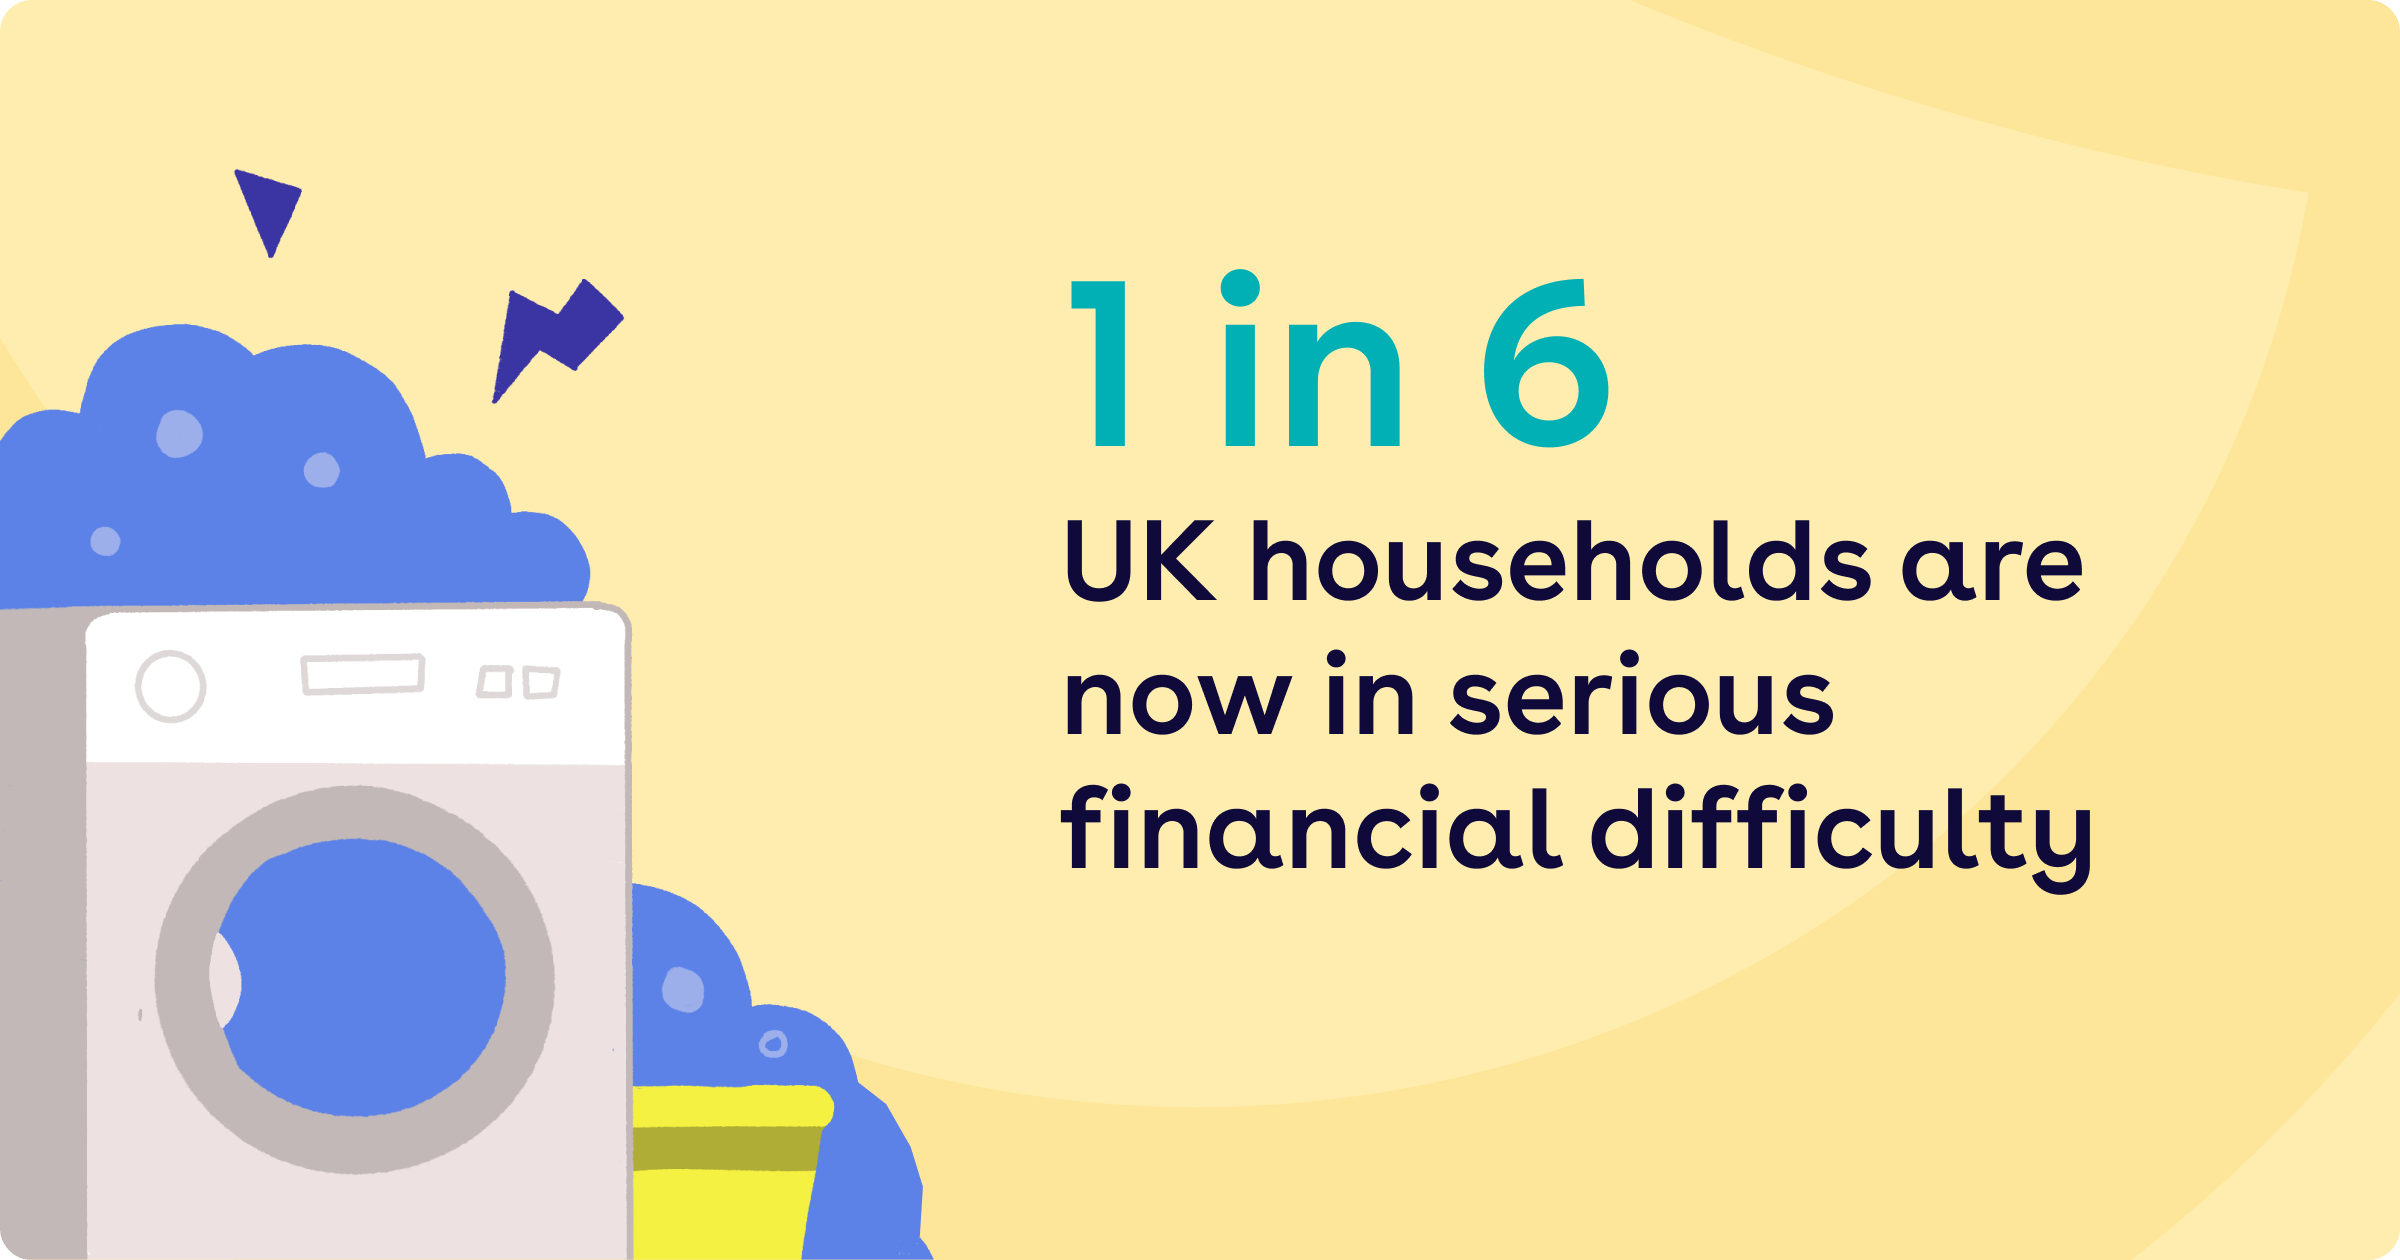 1 in 6 UK households are now in series financial difficulty 